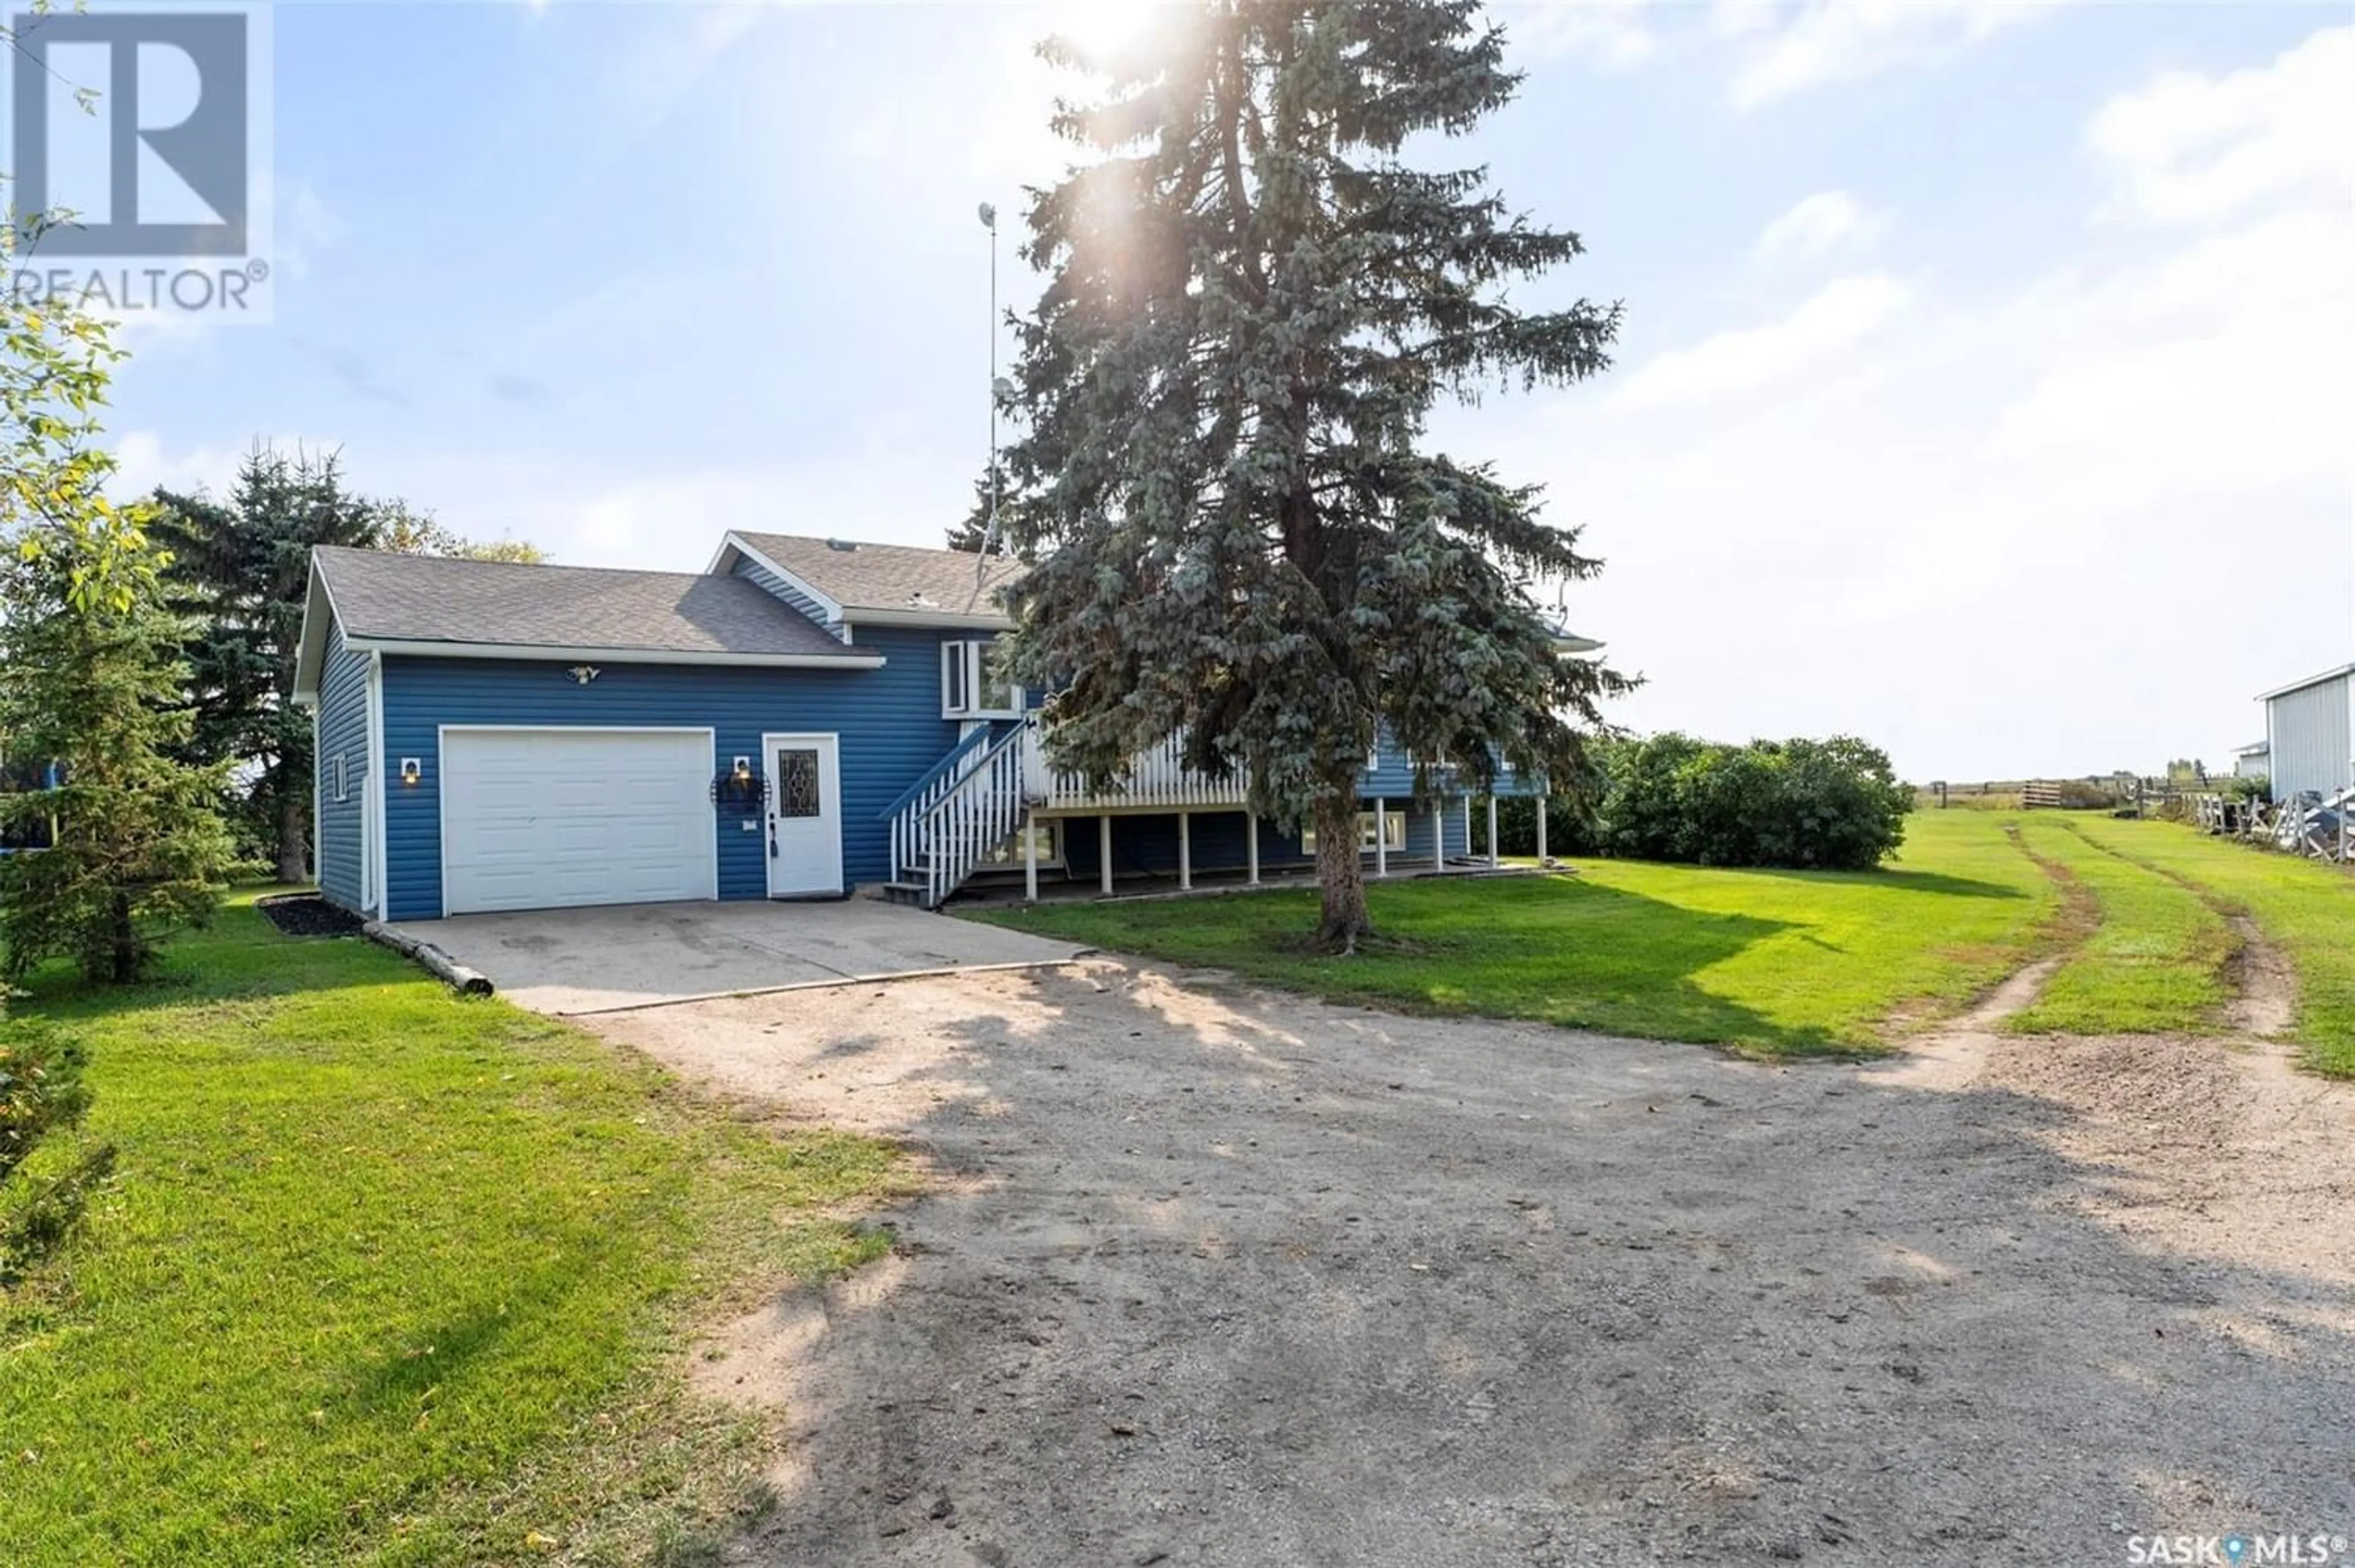 Frontside or backside of a home for RM of Rosthern - 7.01 Acres, Rosthern Rm No. 403 Saskatchewan S0K3A9